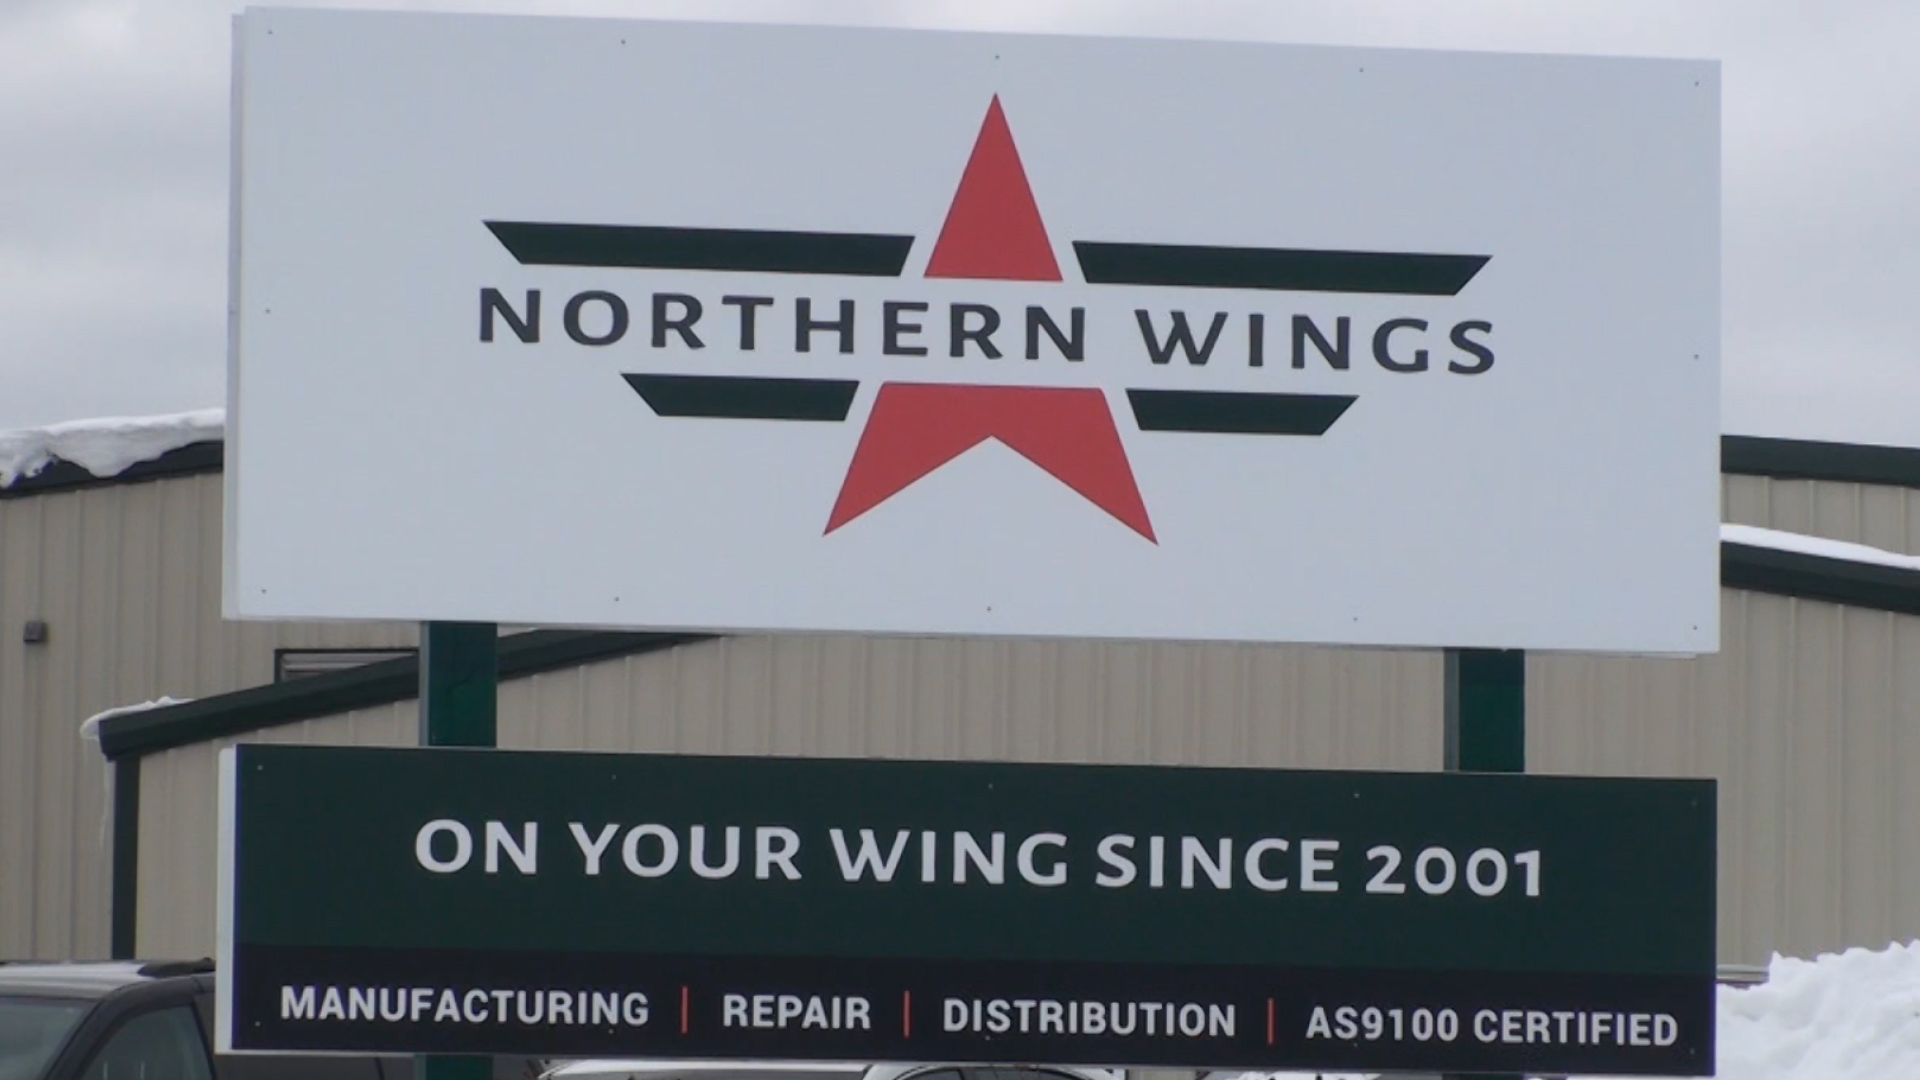 Northwestern Wings. On your wing since 2001.